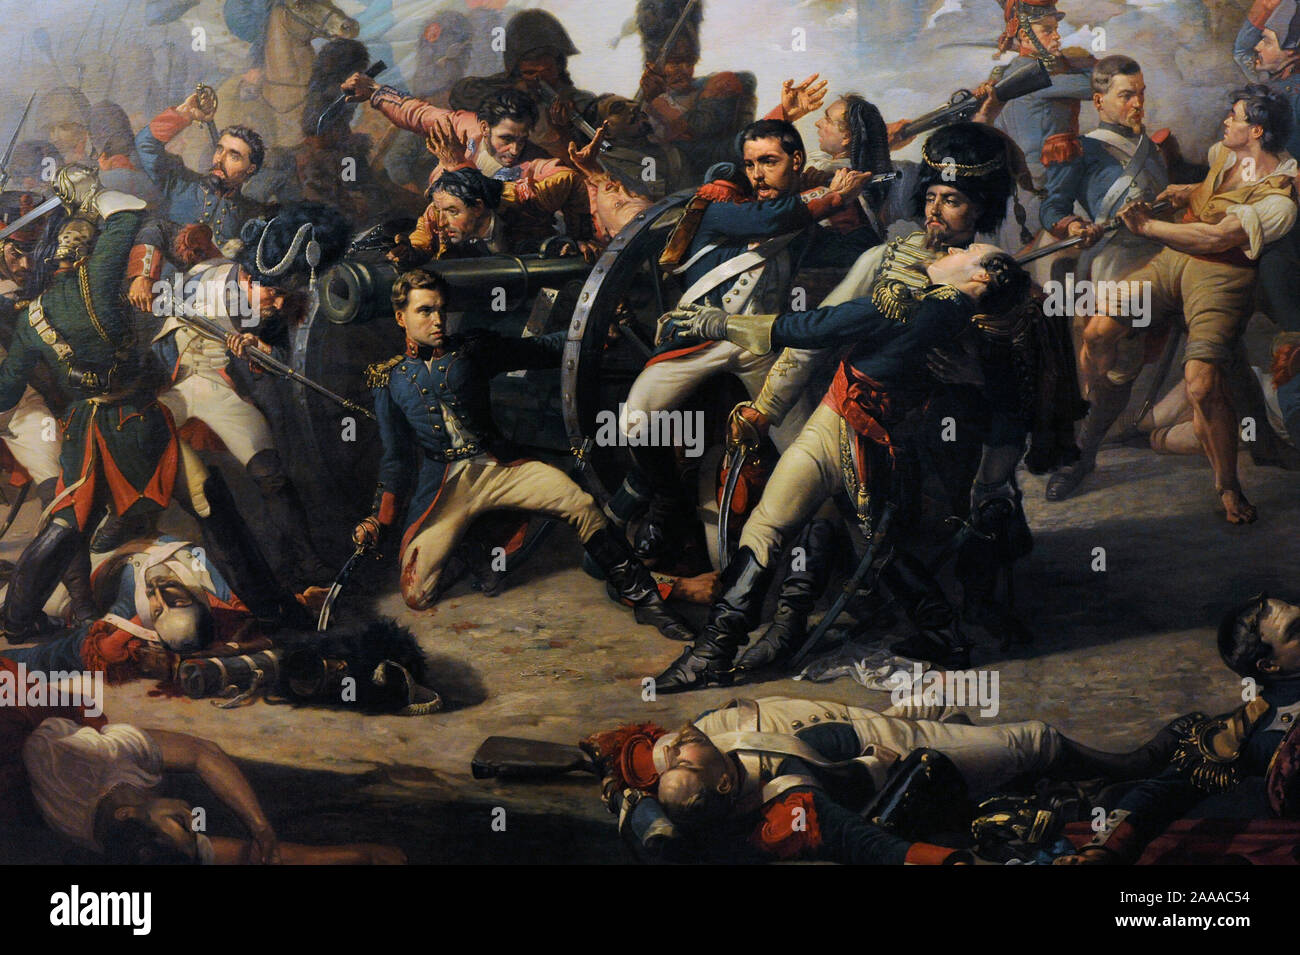 Luis Daoiz y Torres (1767-1808). Spanish military. Death of Daoiz and Defence of Monteleon Park, 1862. Detail. Painting by Manuel Castellano (1826-1880). History Museum. Madrid. Spain. Stock Photo